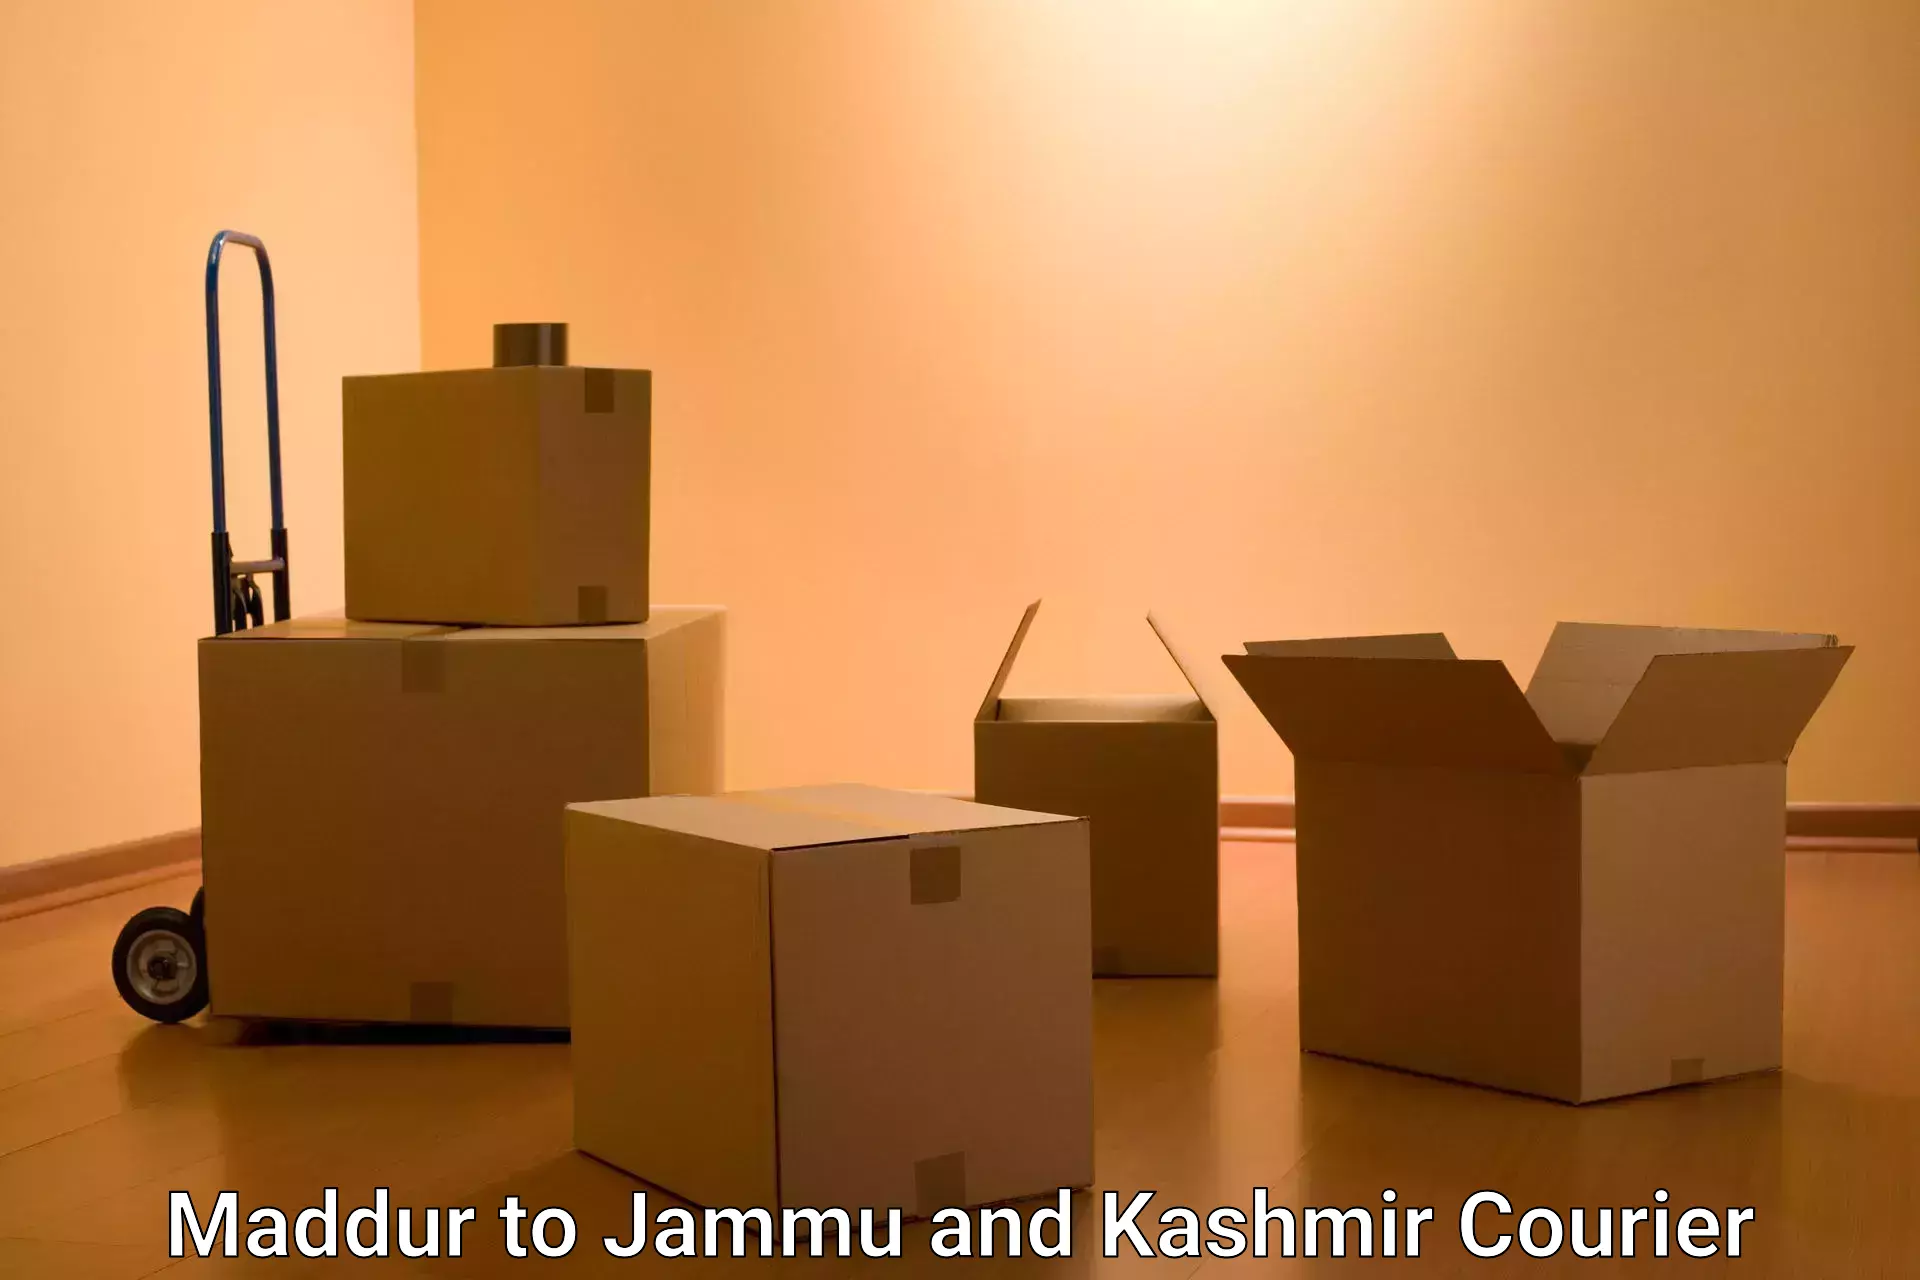 Next-day delivery options Maddur to Jammu and Kashmir